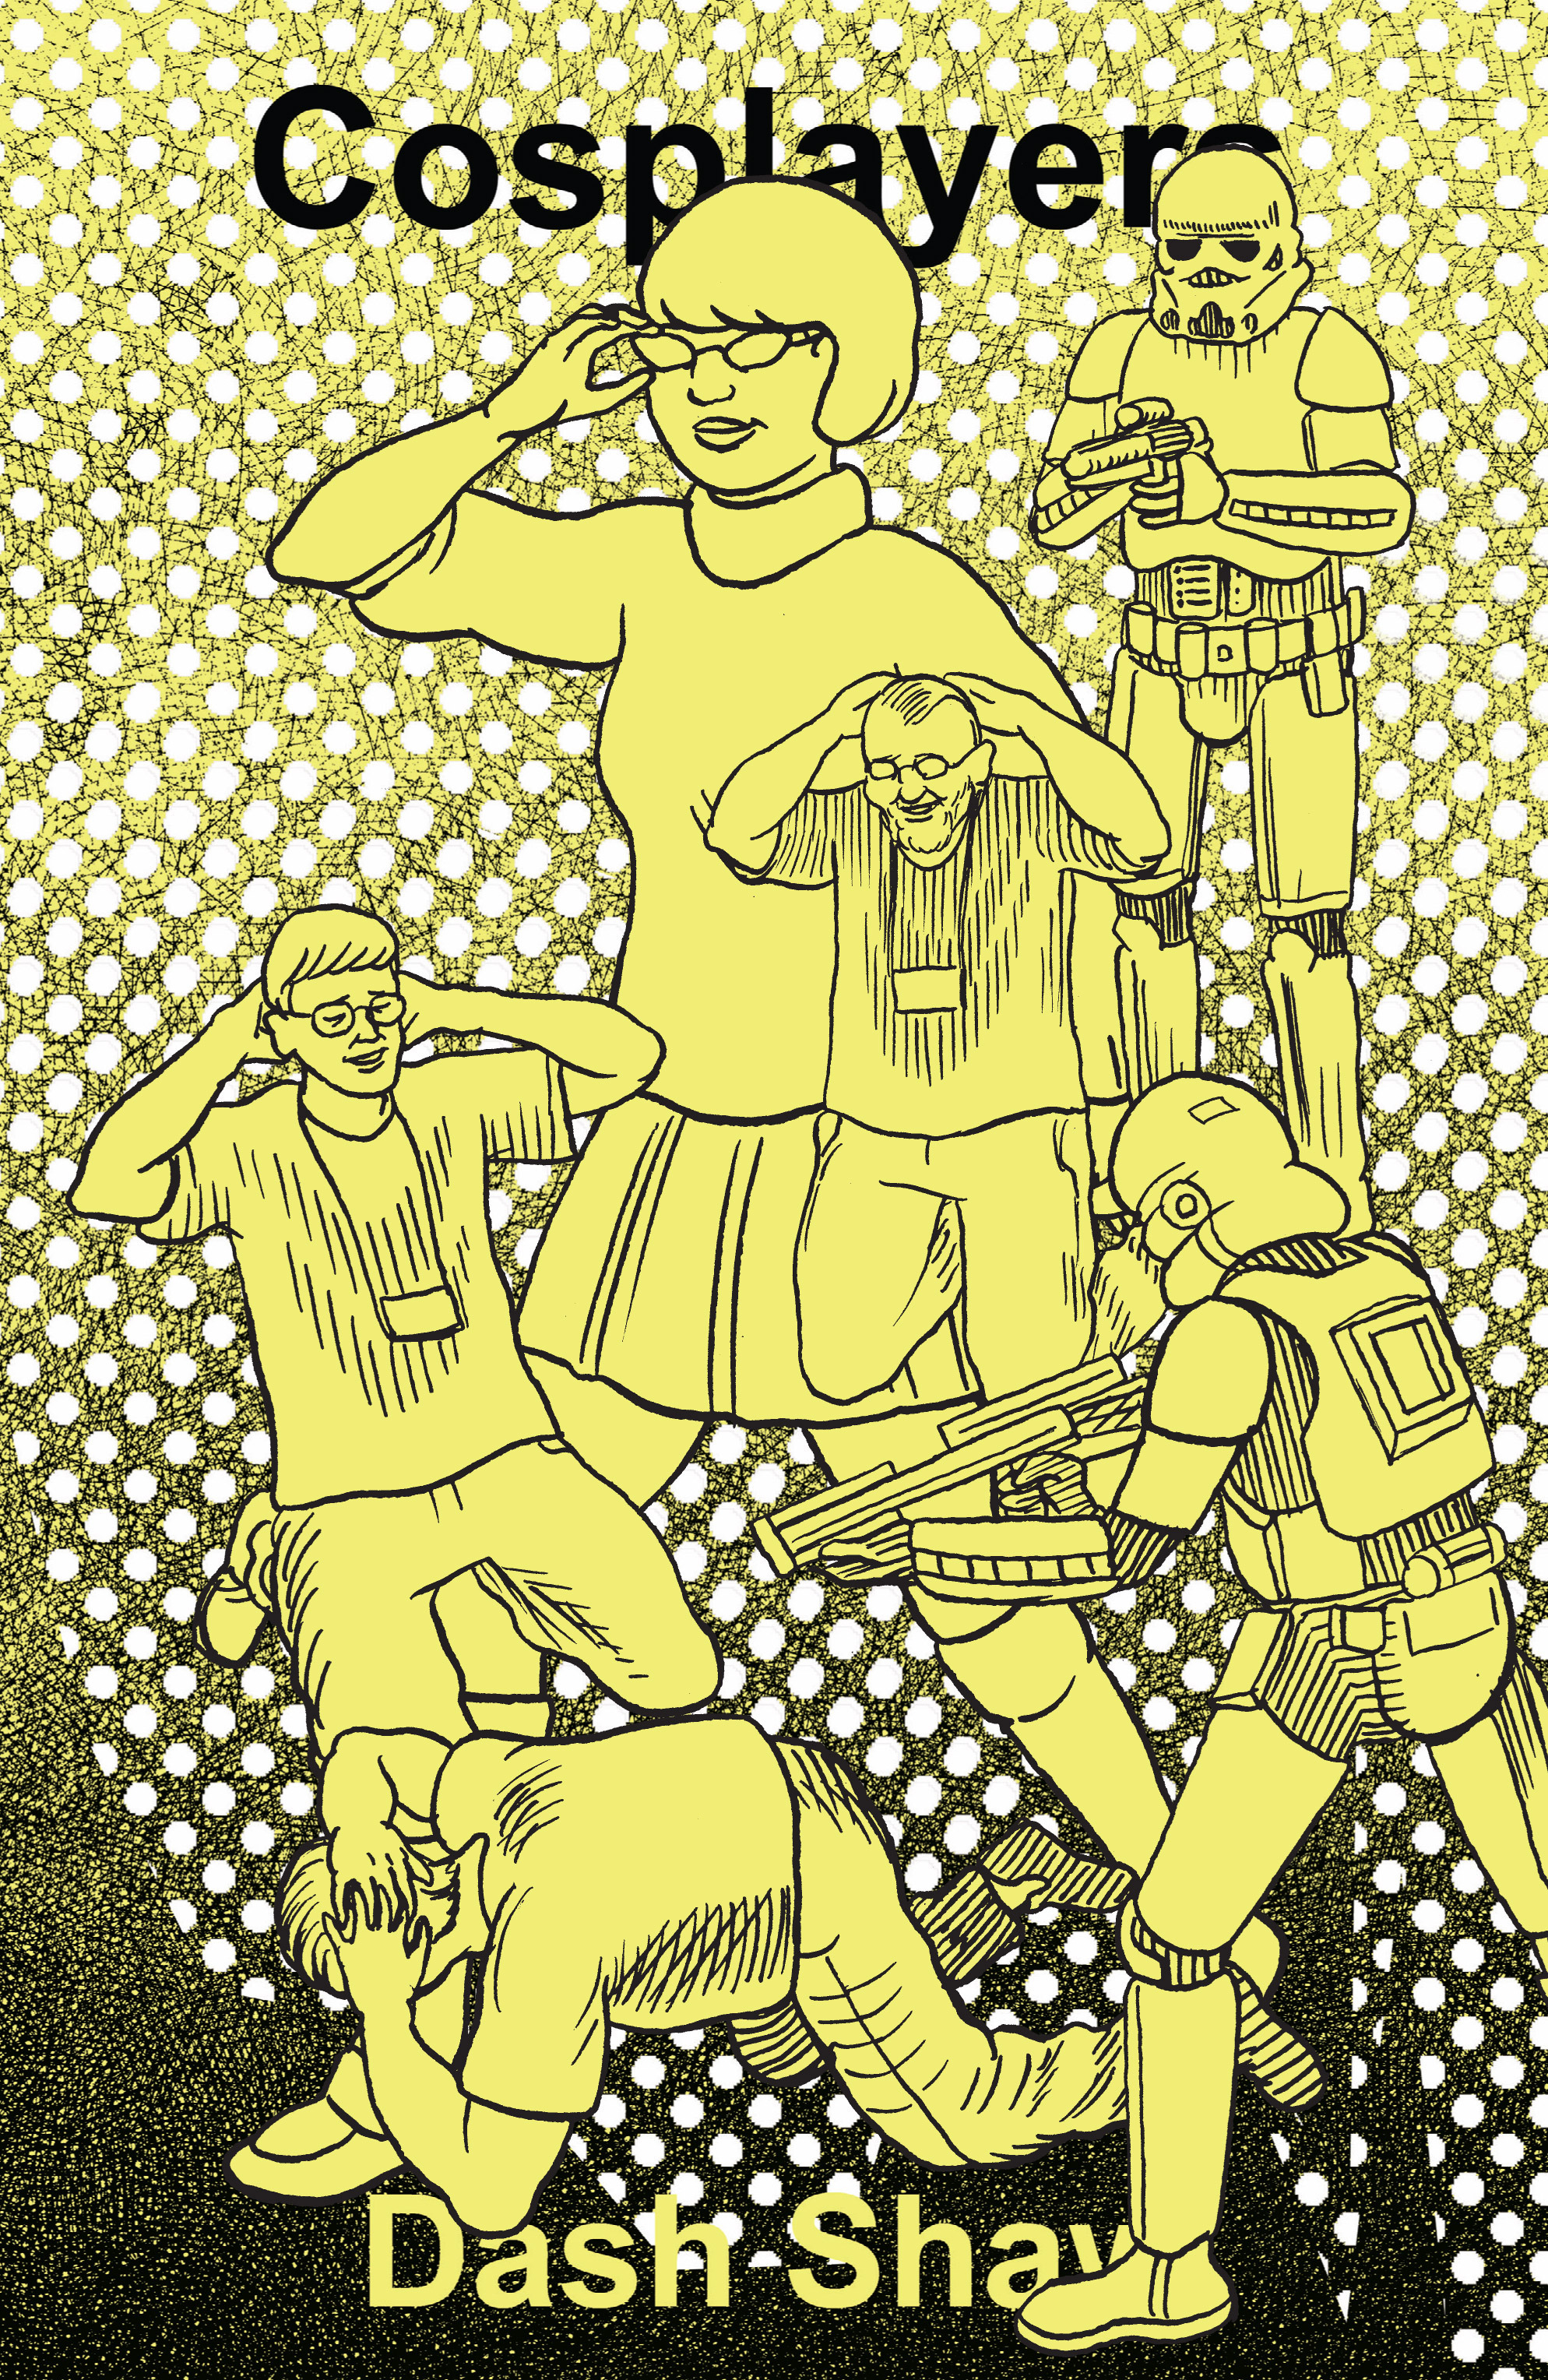 Read online Free Comic Book Day 2015 comic -  Issue # Hip Hop Family Tree Three-in-One - Featuring Cosplayers - 39